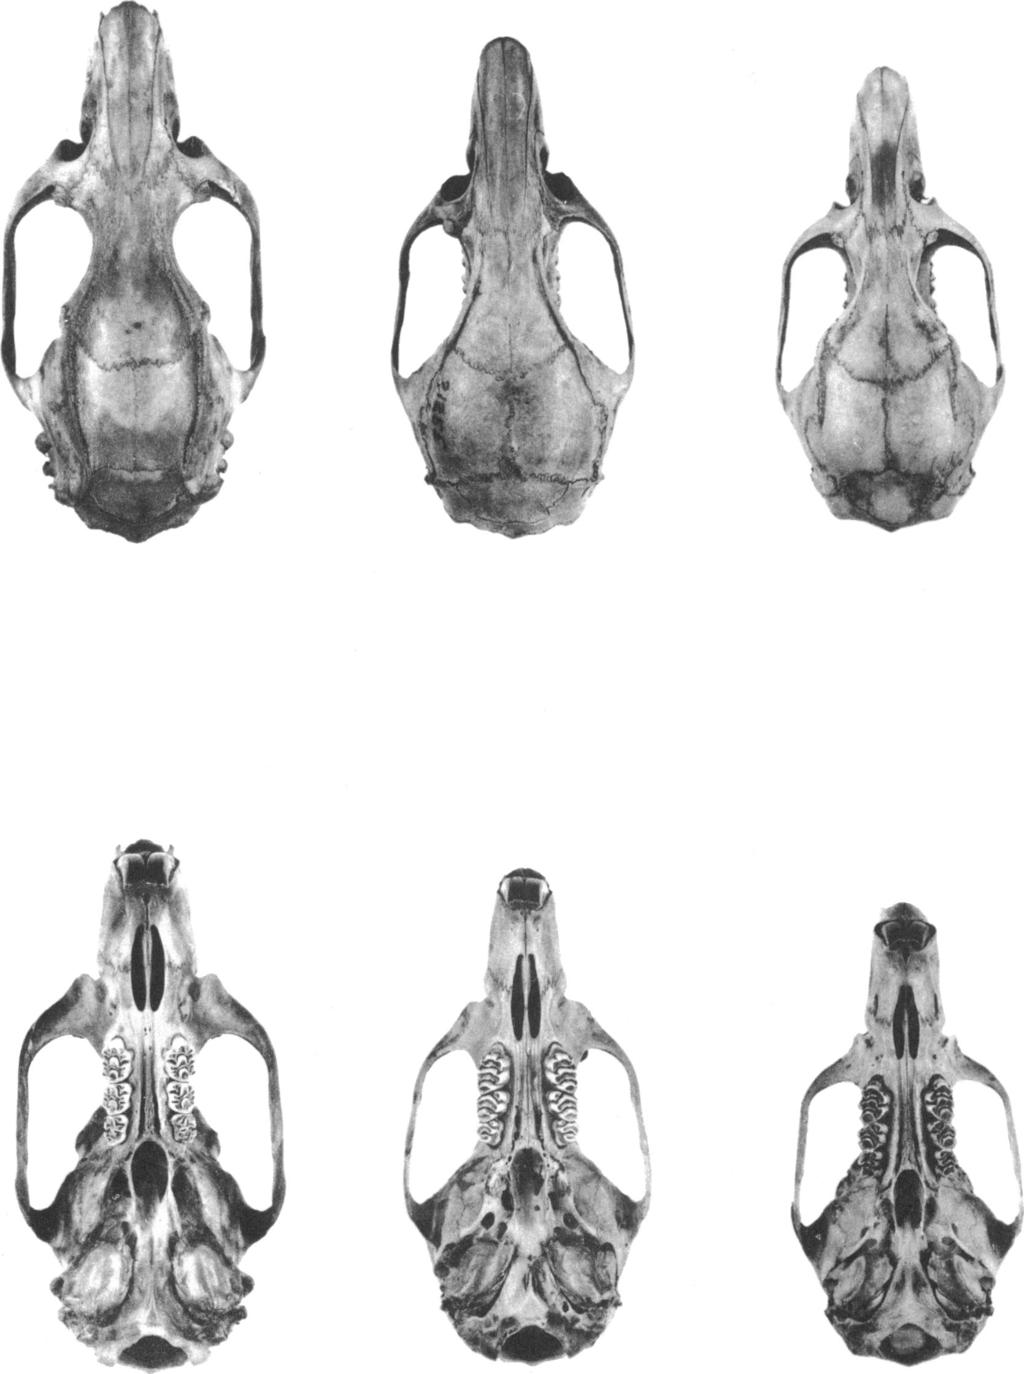 20 AMERICAN MUSEUM NOVITATES NO. 2440 FIG. 1. Dorsal (top) and ventral (bottom) views of crania. Left to right: Lenomys meyeri (A.M.N.H. No.